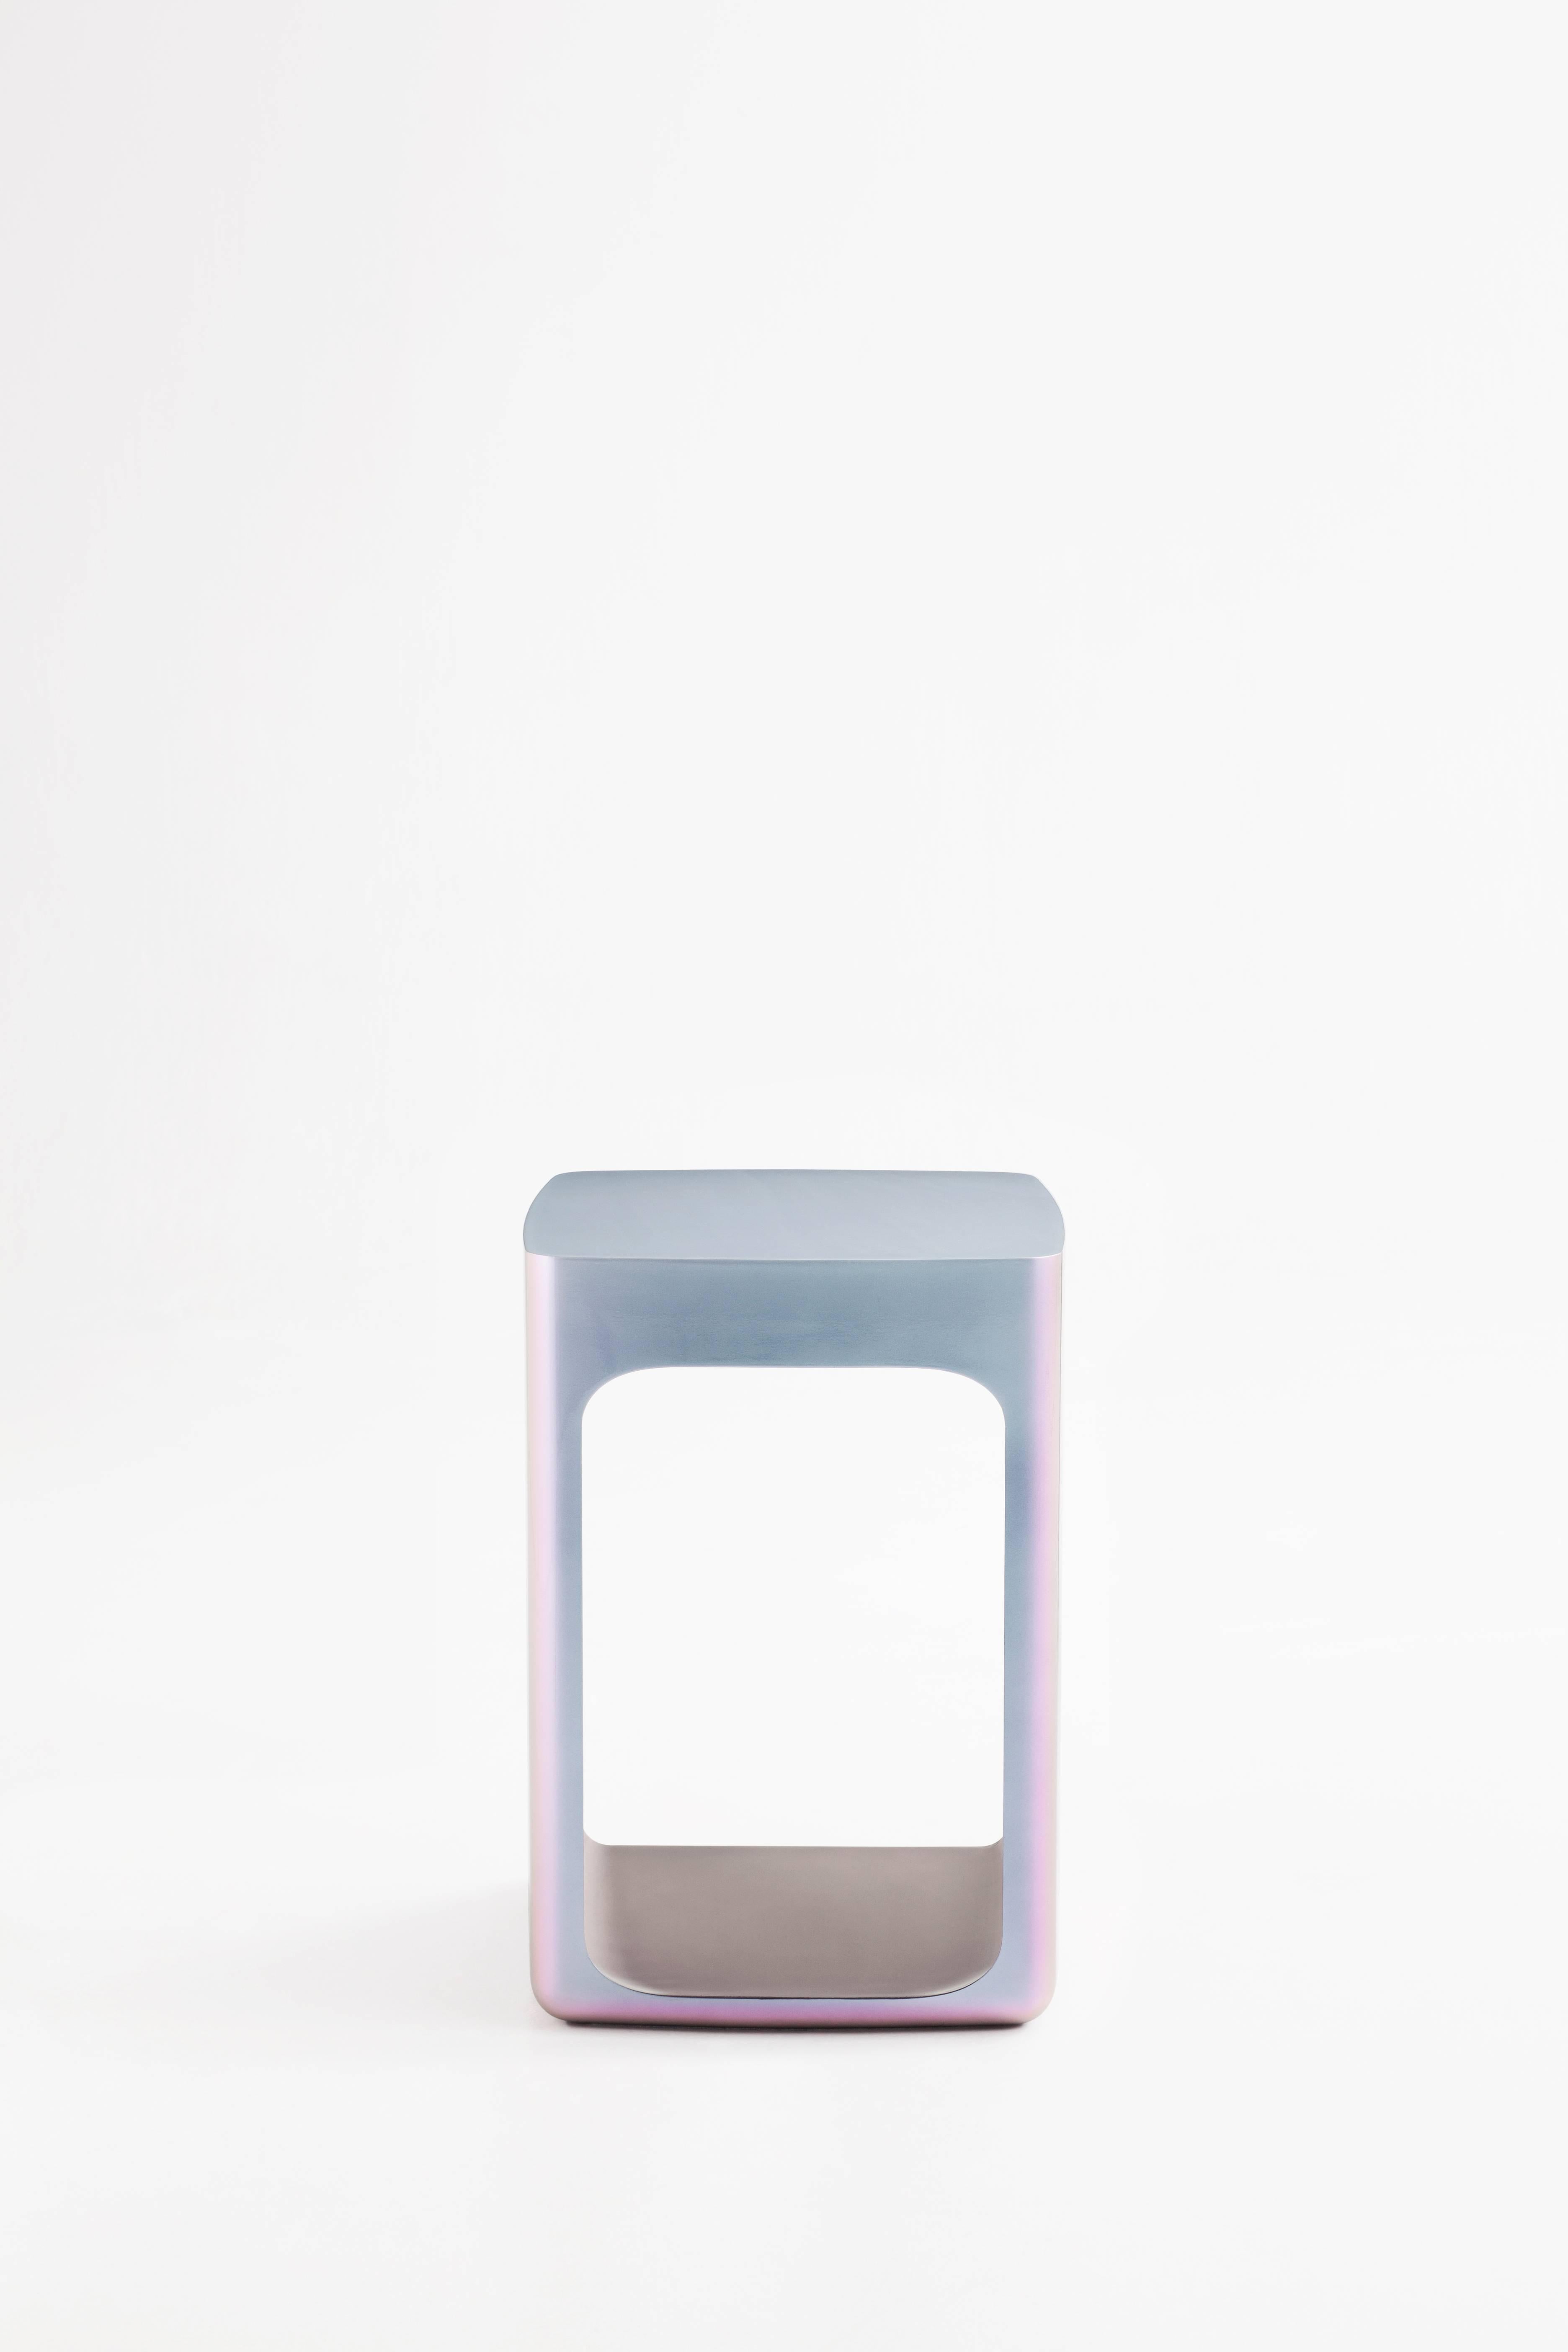 Adolfo Abejon 'Orion' Side Table manufactured in Barcelona

Orion is a side table made in resine composite. It is versatile, because its design allows objects to be placed inside its inferior cavity as well as on top of it. This piece works as a